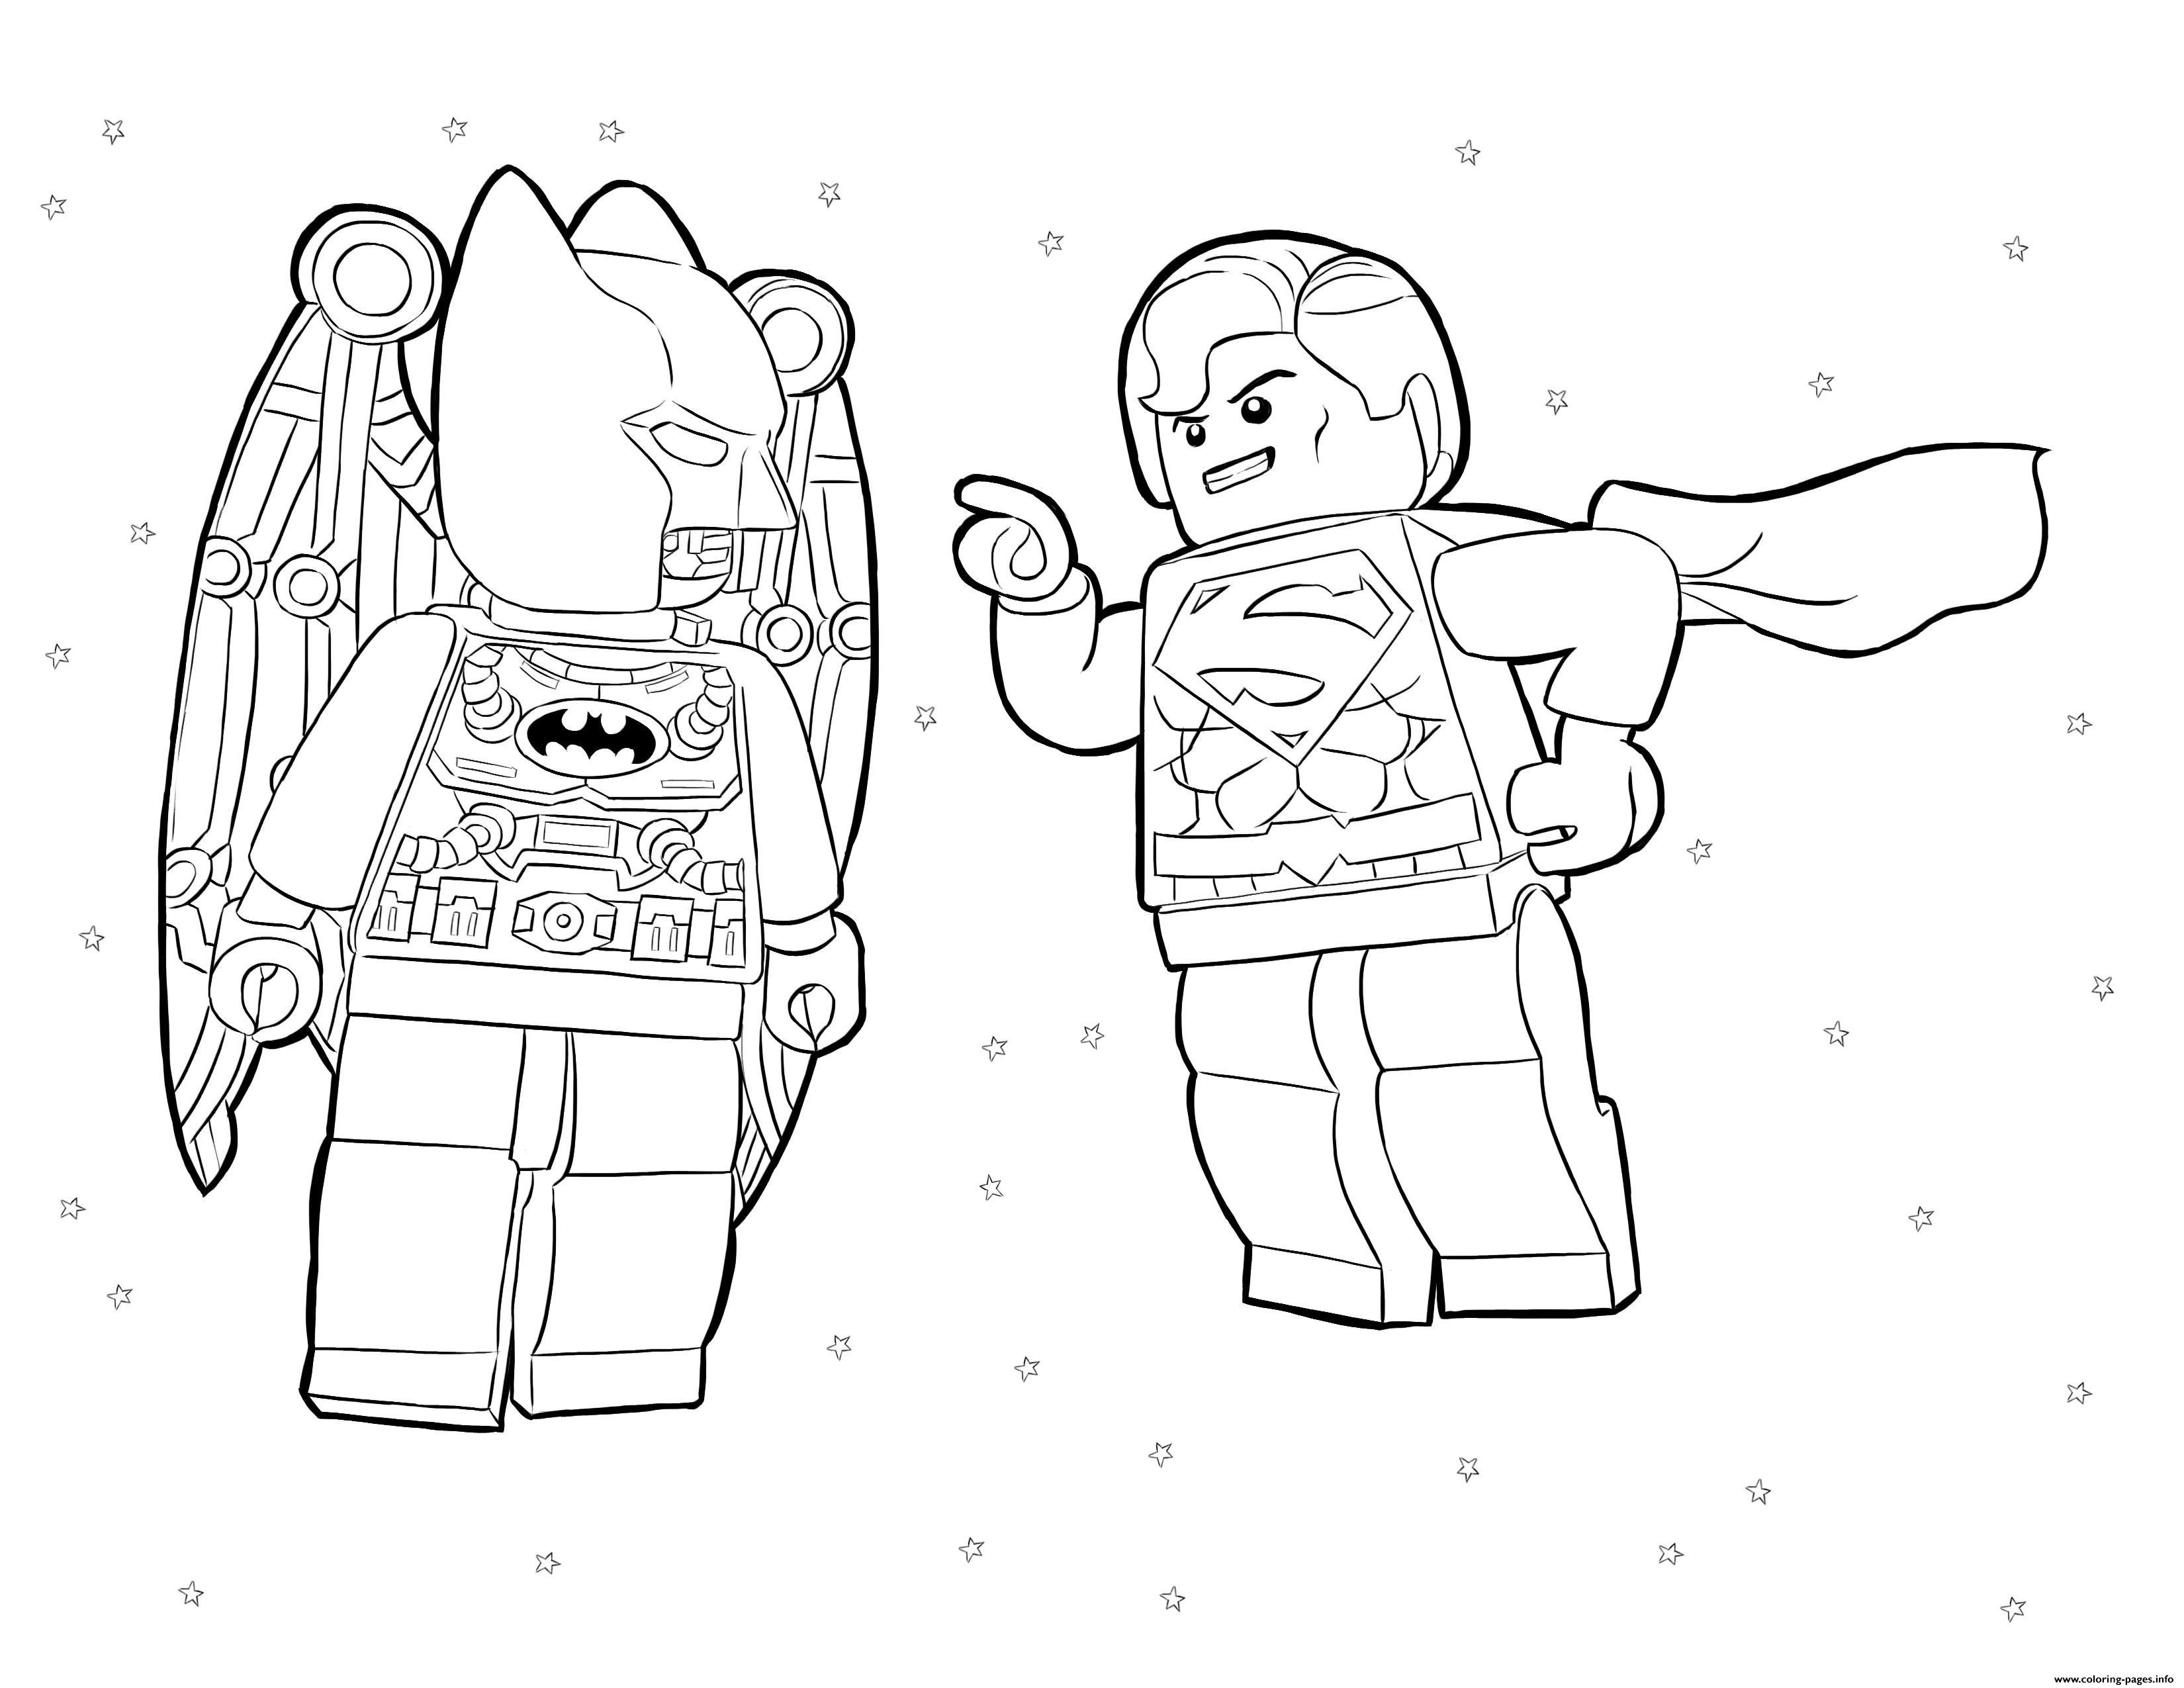 Unikitty Coloring Pages at GetColoringscom Free